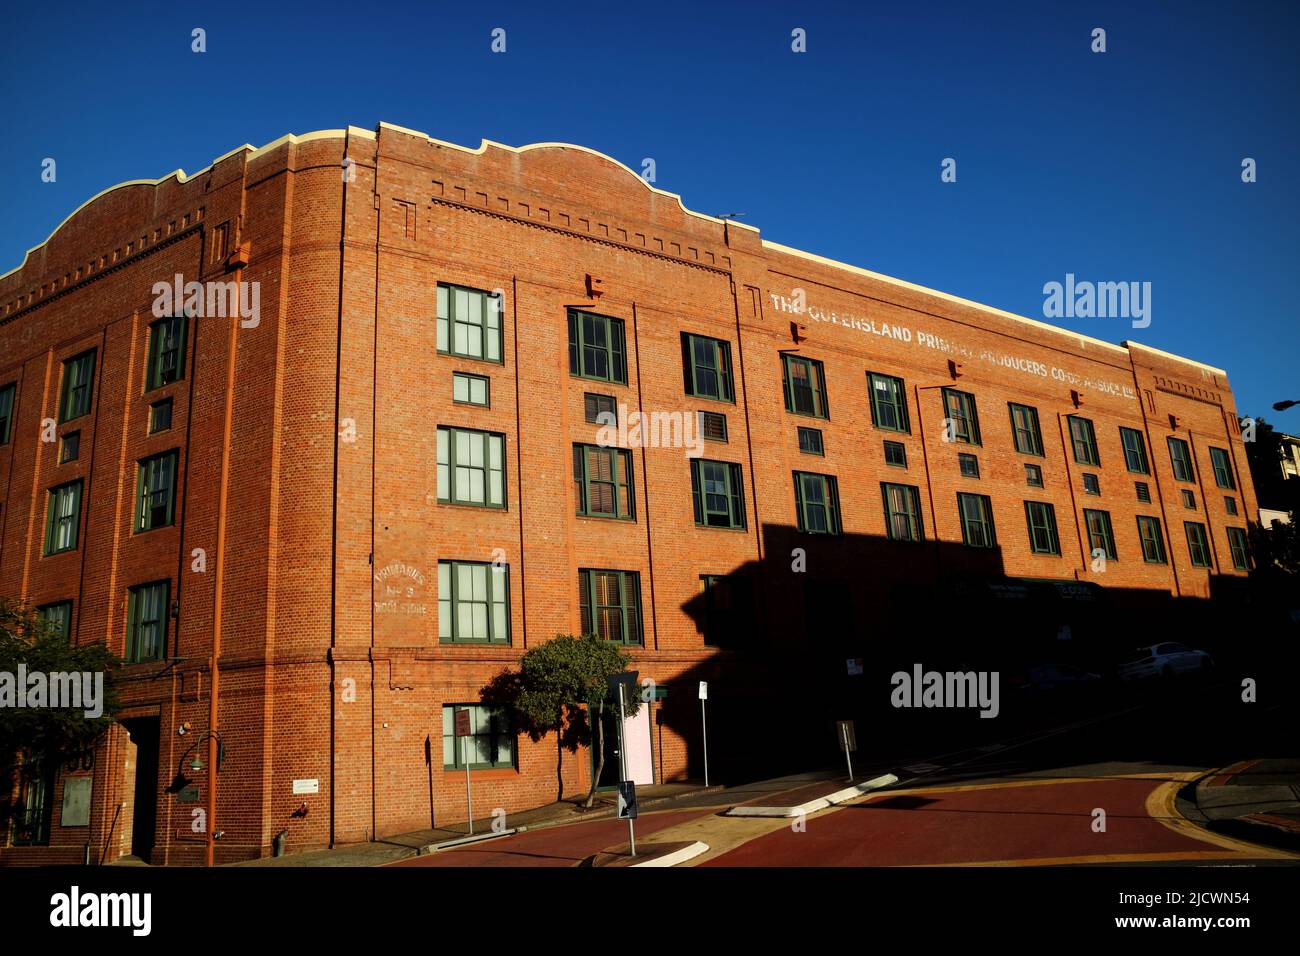 Queensland Primary Producers Woolstore No 3 heritage listed brick building in Teneriffe, Brisbane, Australia Stock Photo